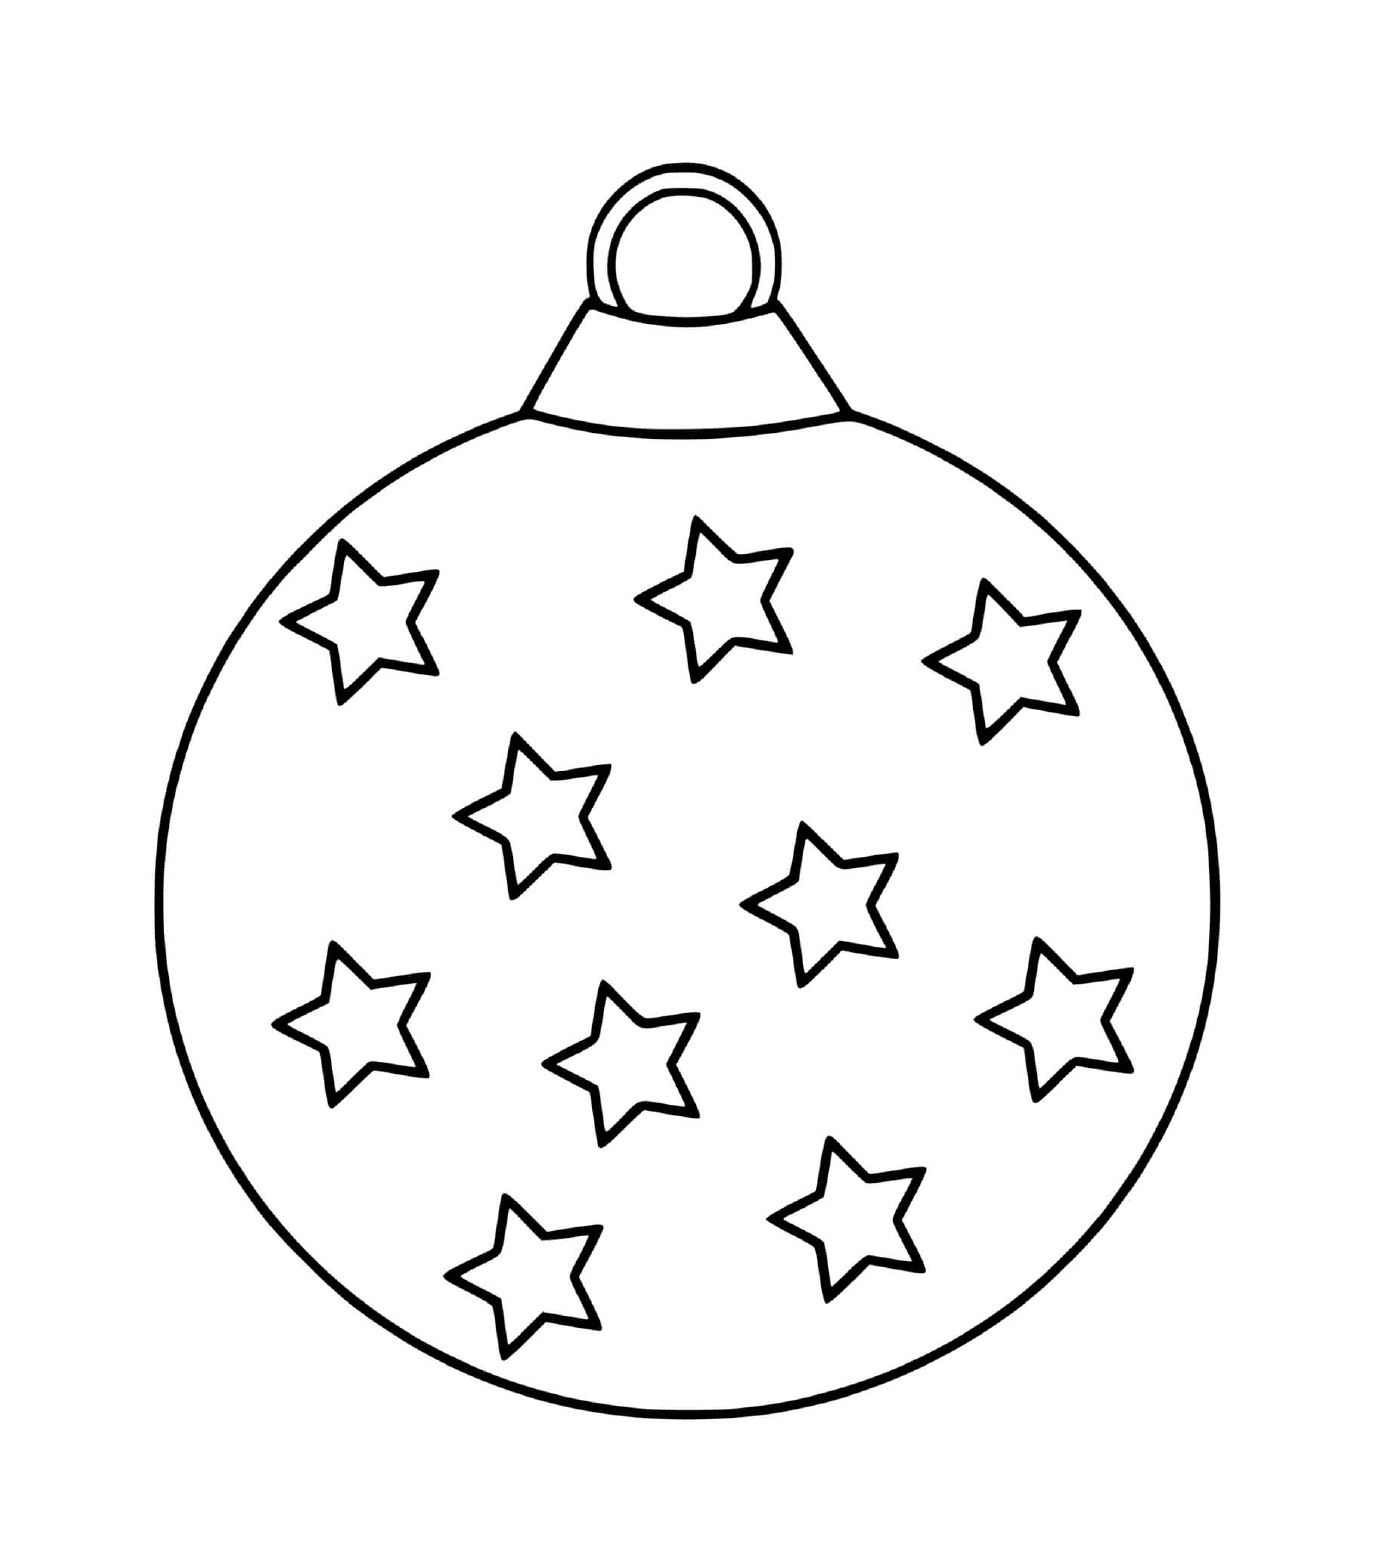  A motherly Christmas ball with stars 